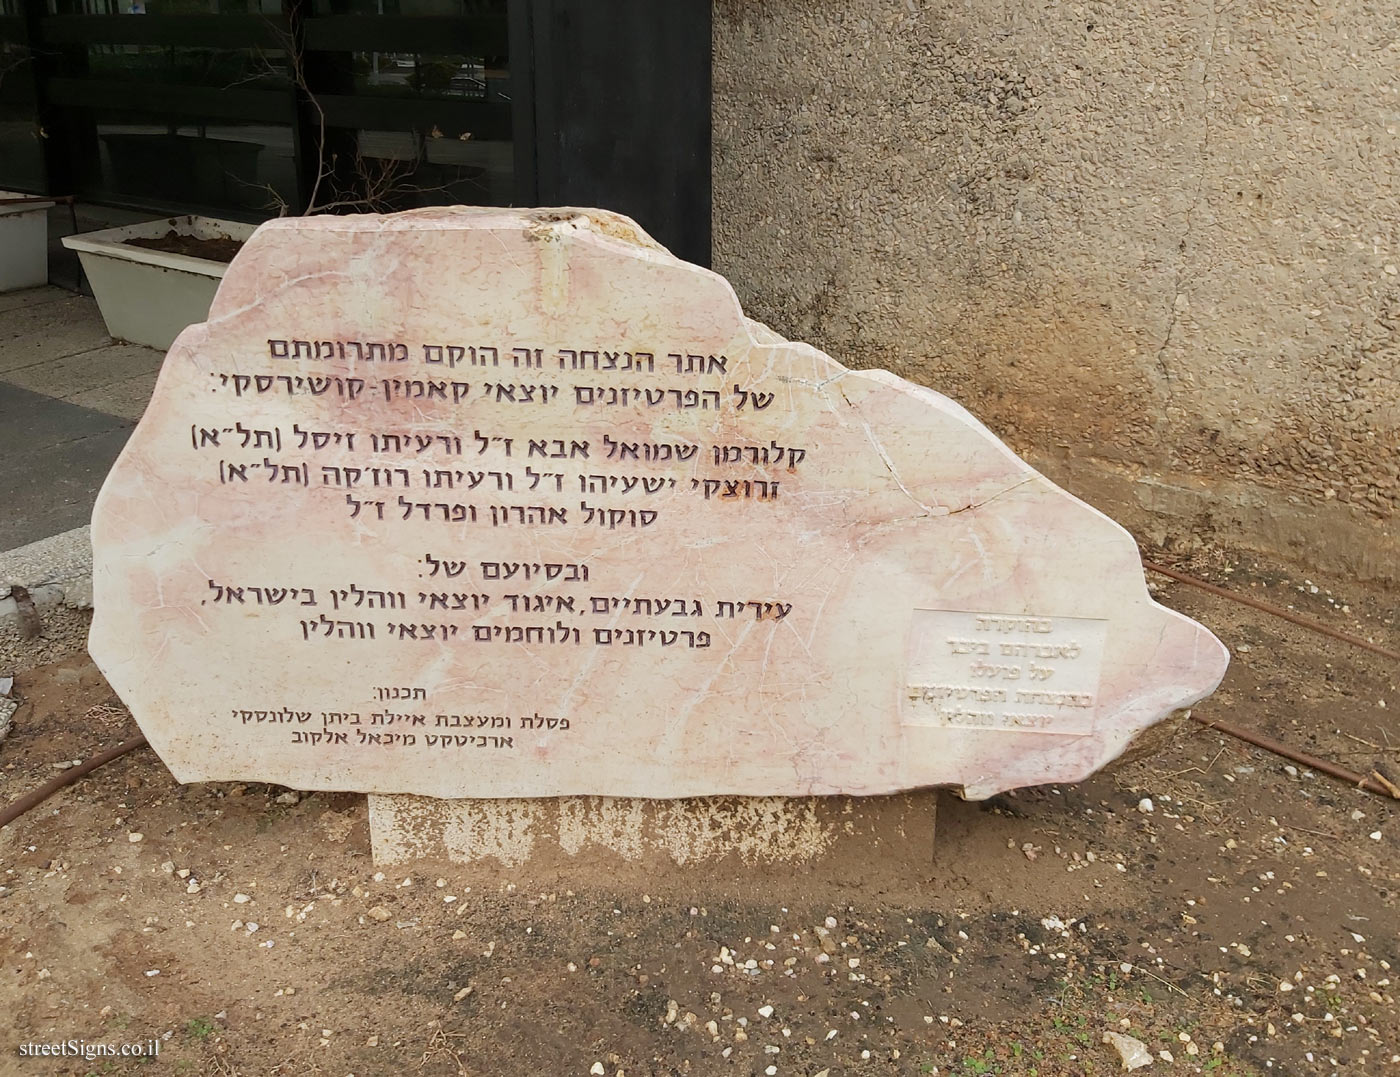 Givatayim - A monument in memory of the Jewish partisans and Jewish fighters from Wolyn - Korazin St 10, Giv’atayim, Israel